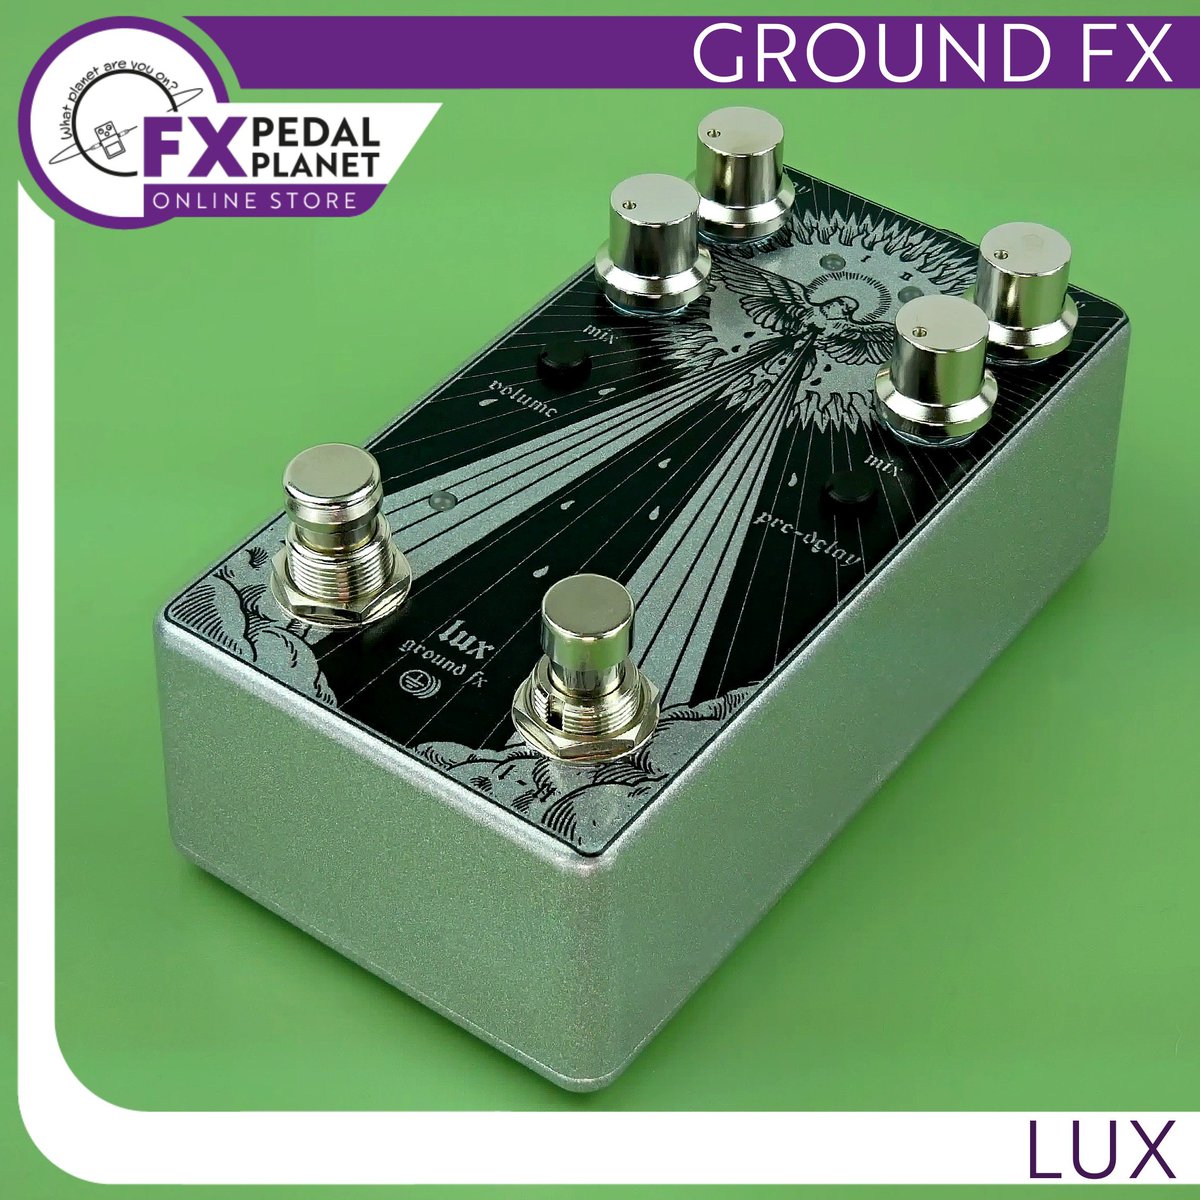 Ground FX Lux

fxpedalplanet.co.uk/product/ground…

#fxpedalplanet #fxpedalplanetonlinestore

#groundfx #groundfxlux #digitalreverb #ambientreverb #reverbpedal

#handmadepedals #boutiqueeffectspedals #effectspedals #guitareffects #basseffects #guitareffectspedals #basseffectspedals